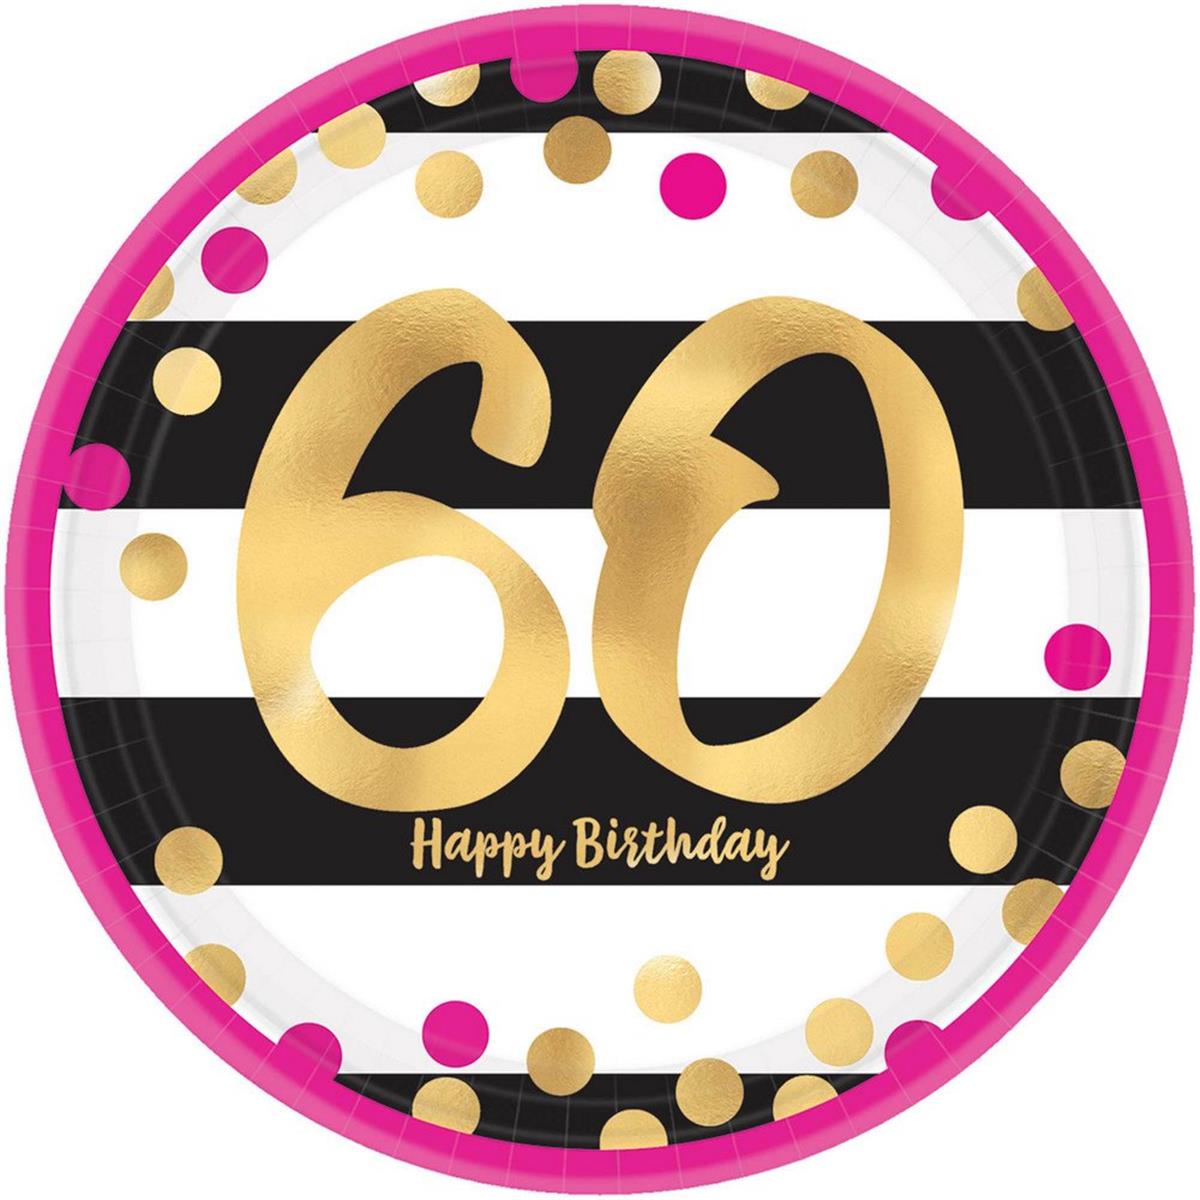 Picture of Amscan 269835 Pink & Gold 60th Birthday 9 in. Metallic Plates - 8 Piece